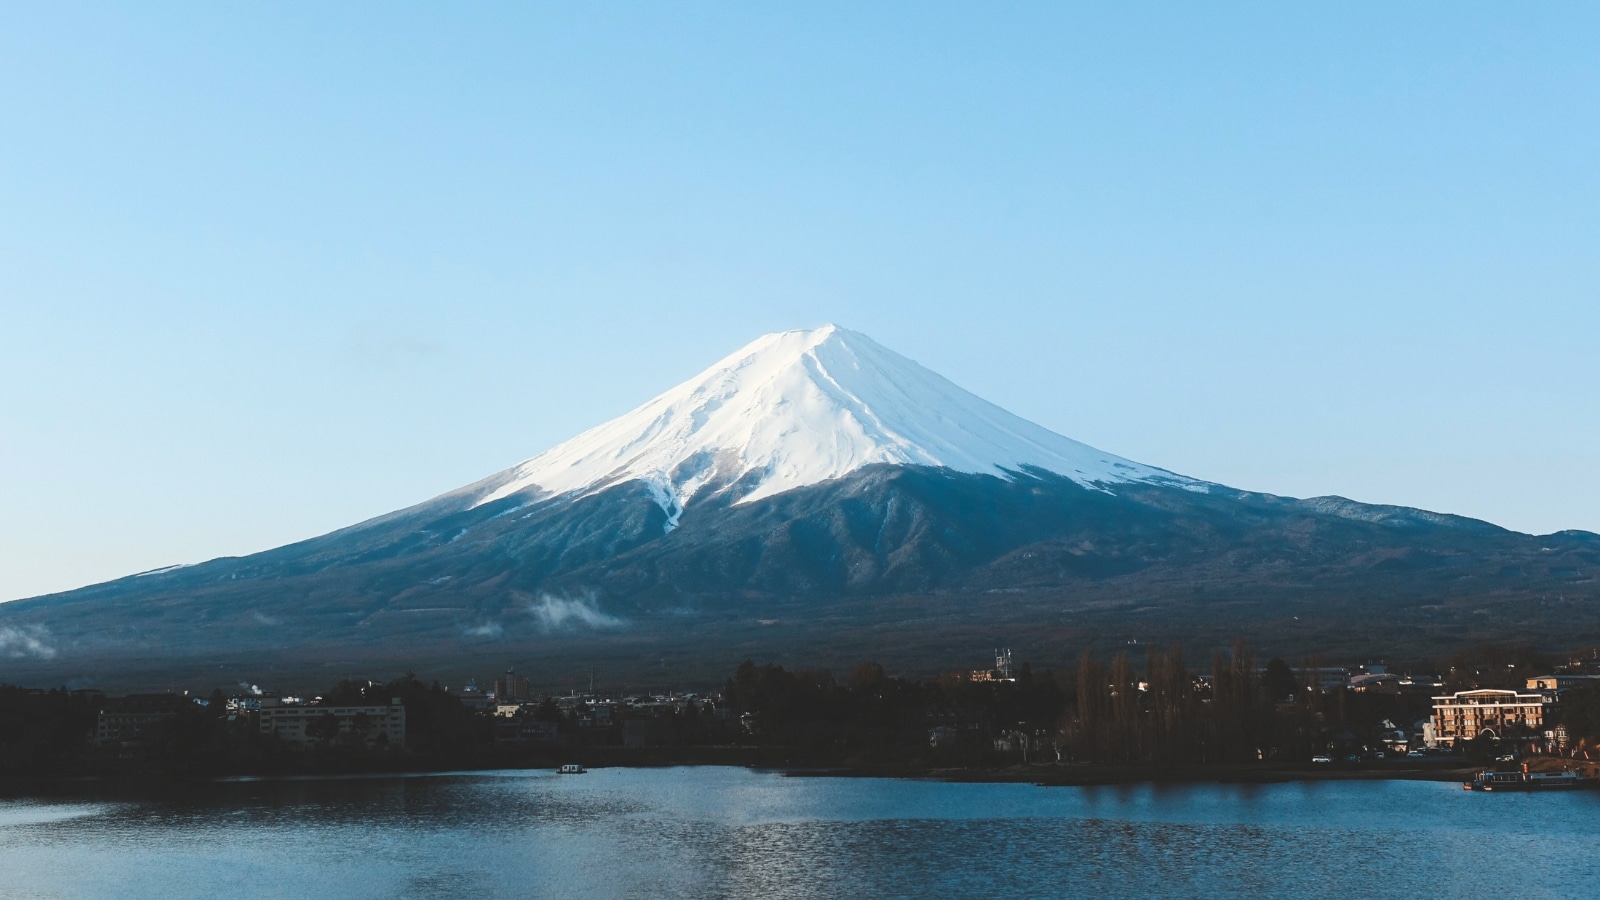 A depiction of Mount Fuji, known as Fujisan, against a clear sky. The image captures the iconic symmetrical cone shape of the mountain, showcasing its prominent presence on the landscape.